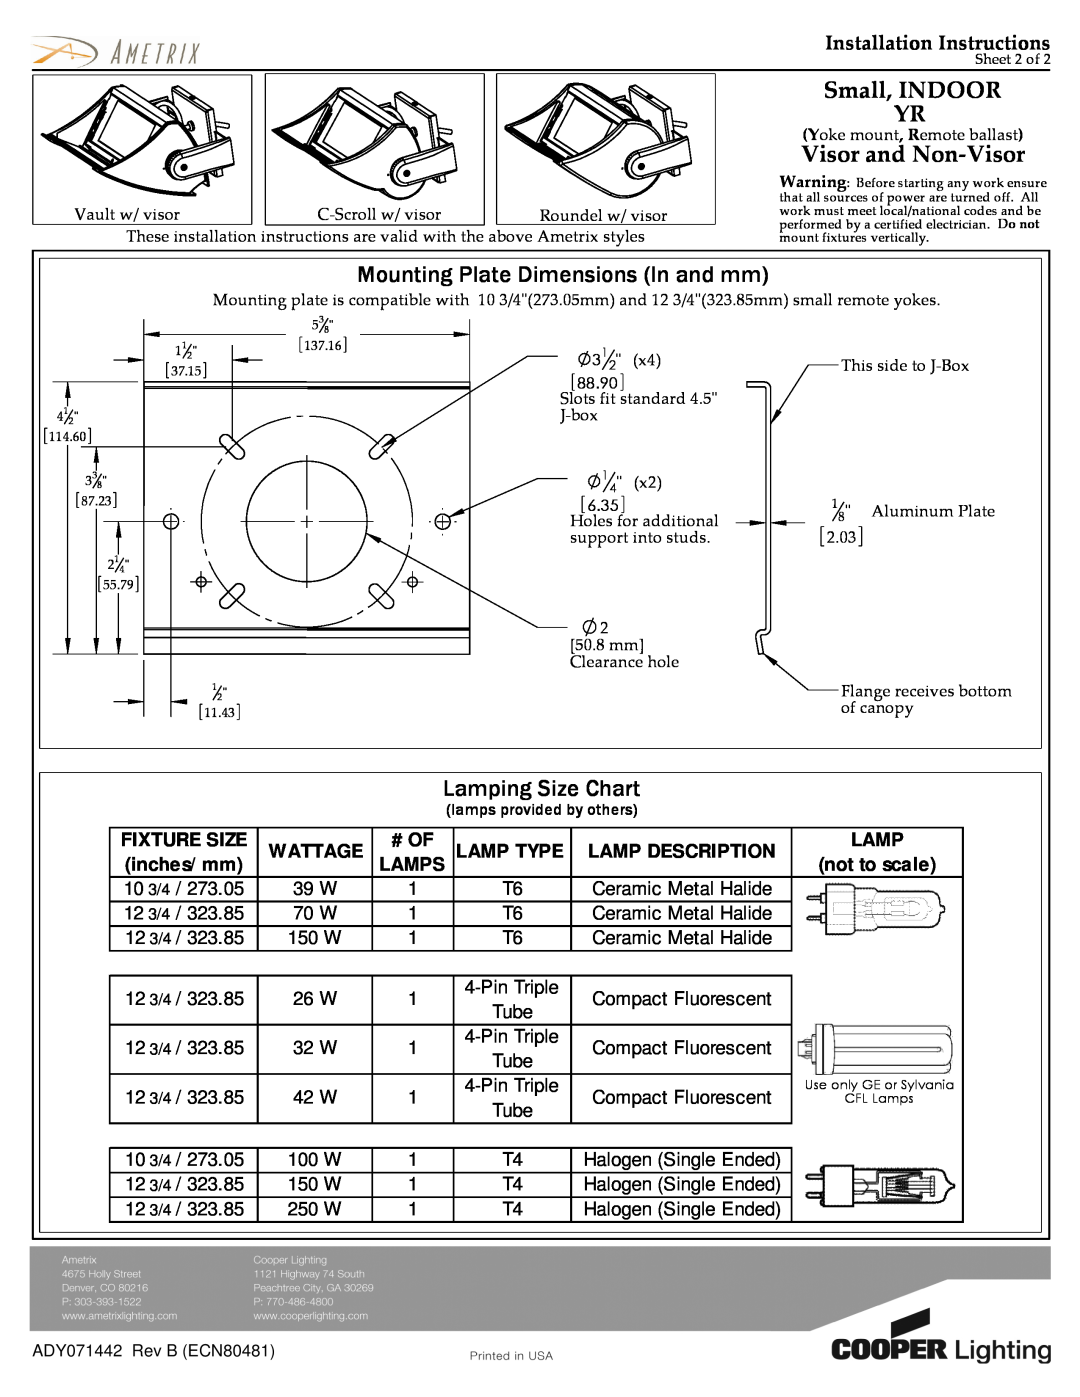 Cooper Lighting ADY071442 Mounting Plate Dimensions In and mm, Lamping Size Chart, Small, INDOOR YR, Visor and Non-Visor 